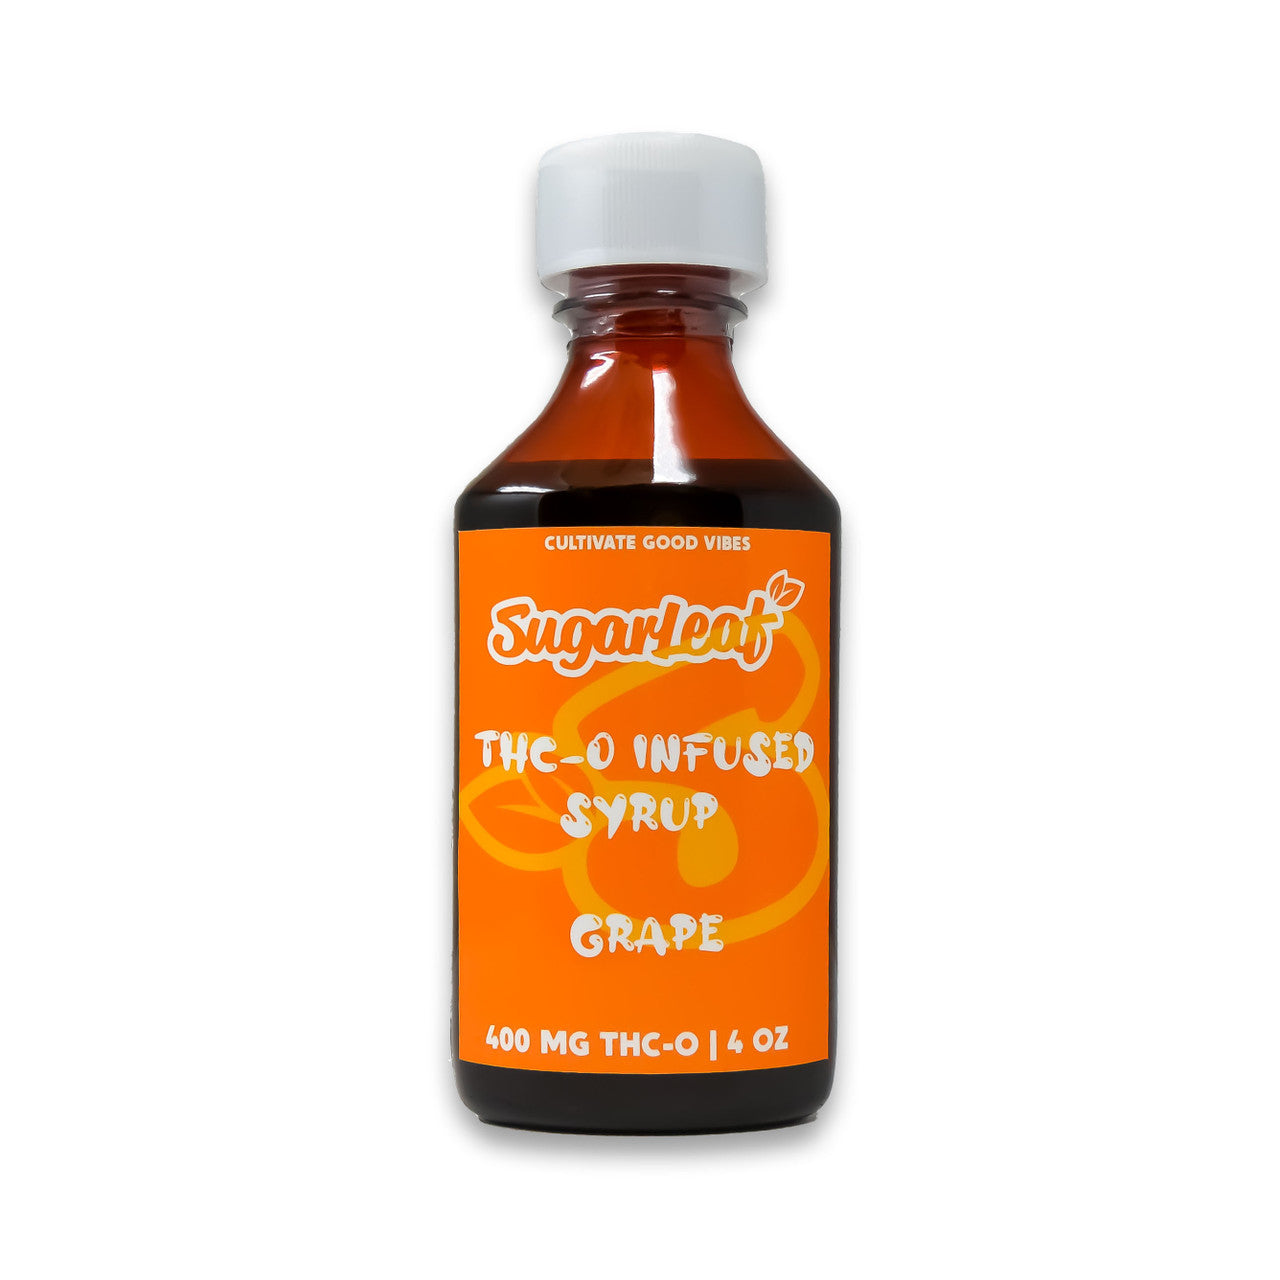 400mg THC-O Infused Syrup | Grape